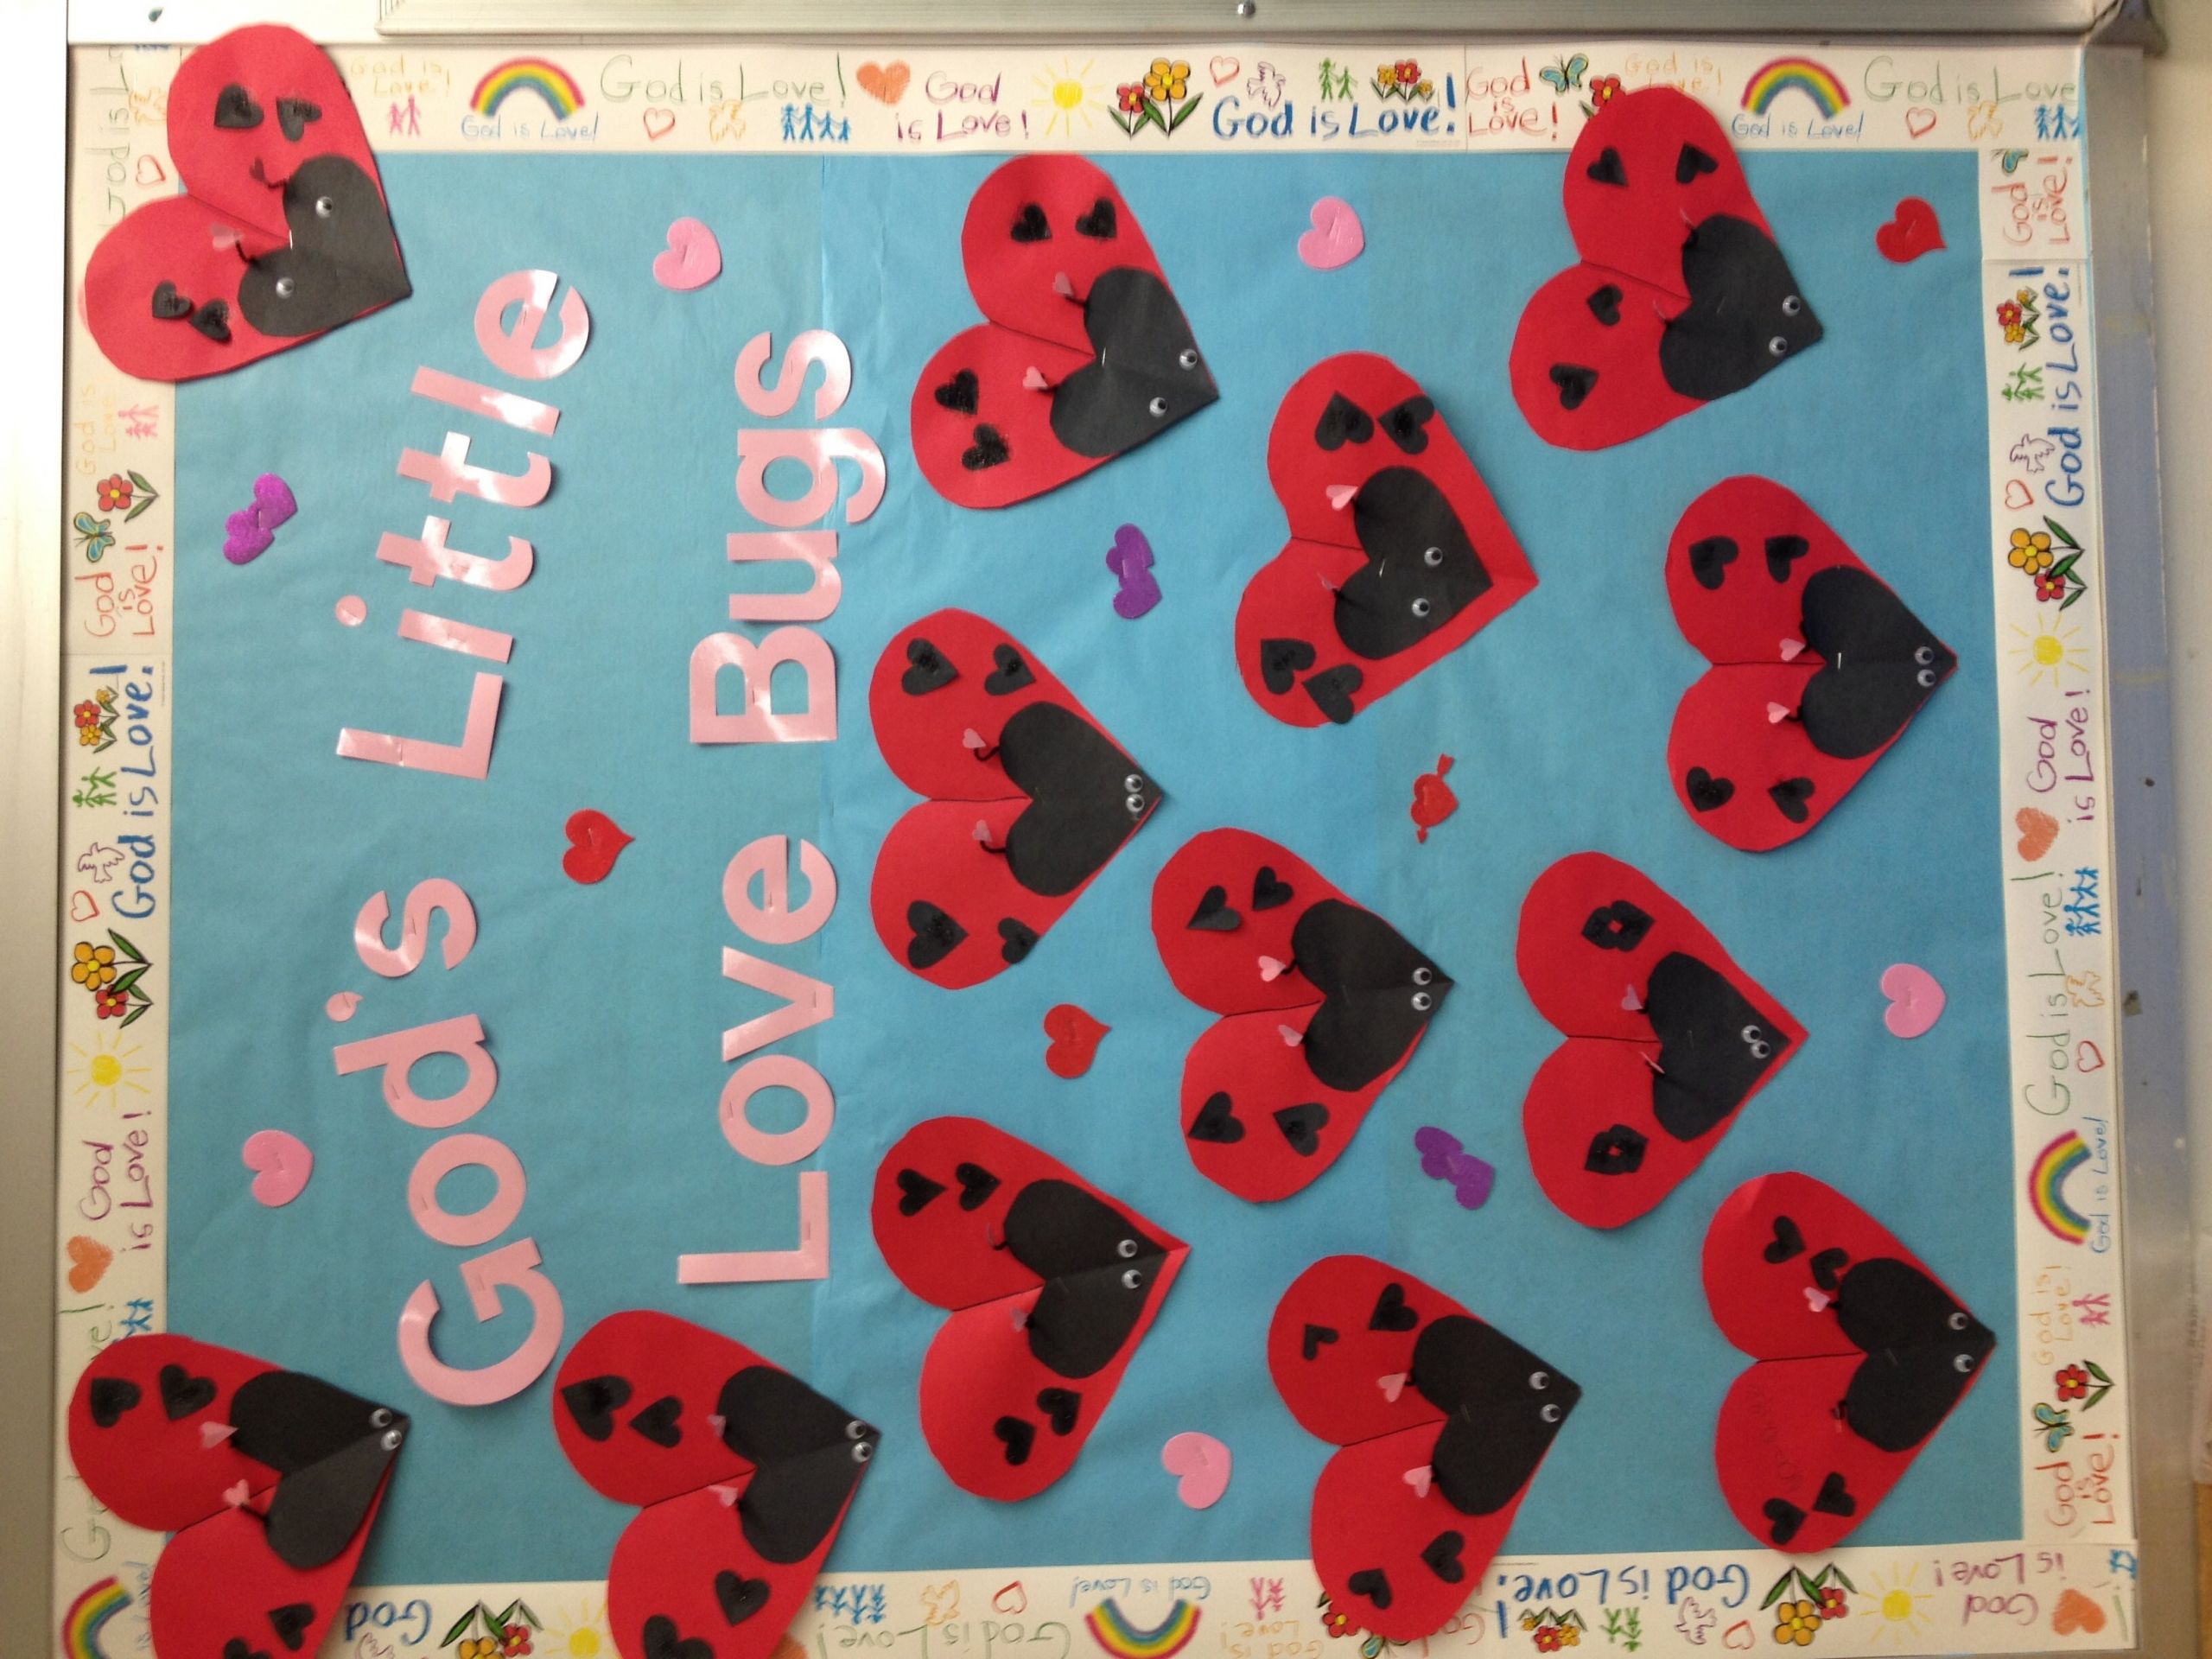 Valentines Day Bulletin Board Ideas For Preschool
 10 Cute February Bulletin Board Ideas For Preschool 2020